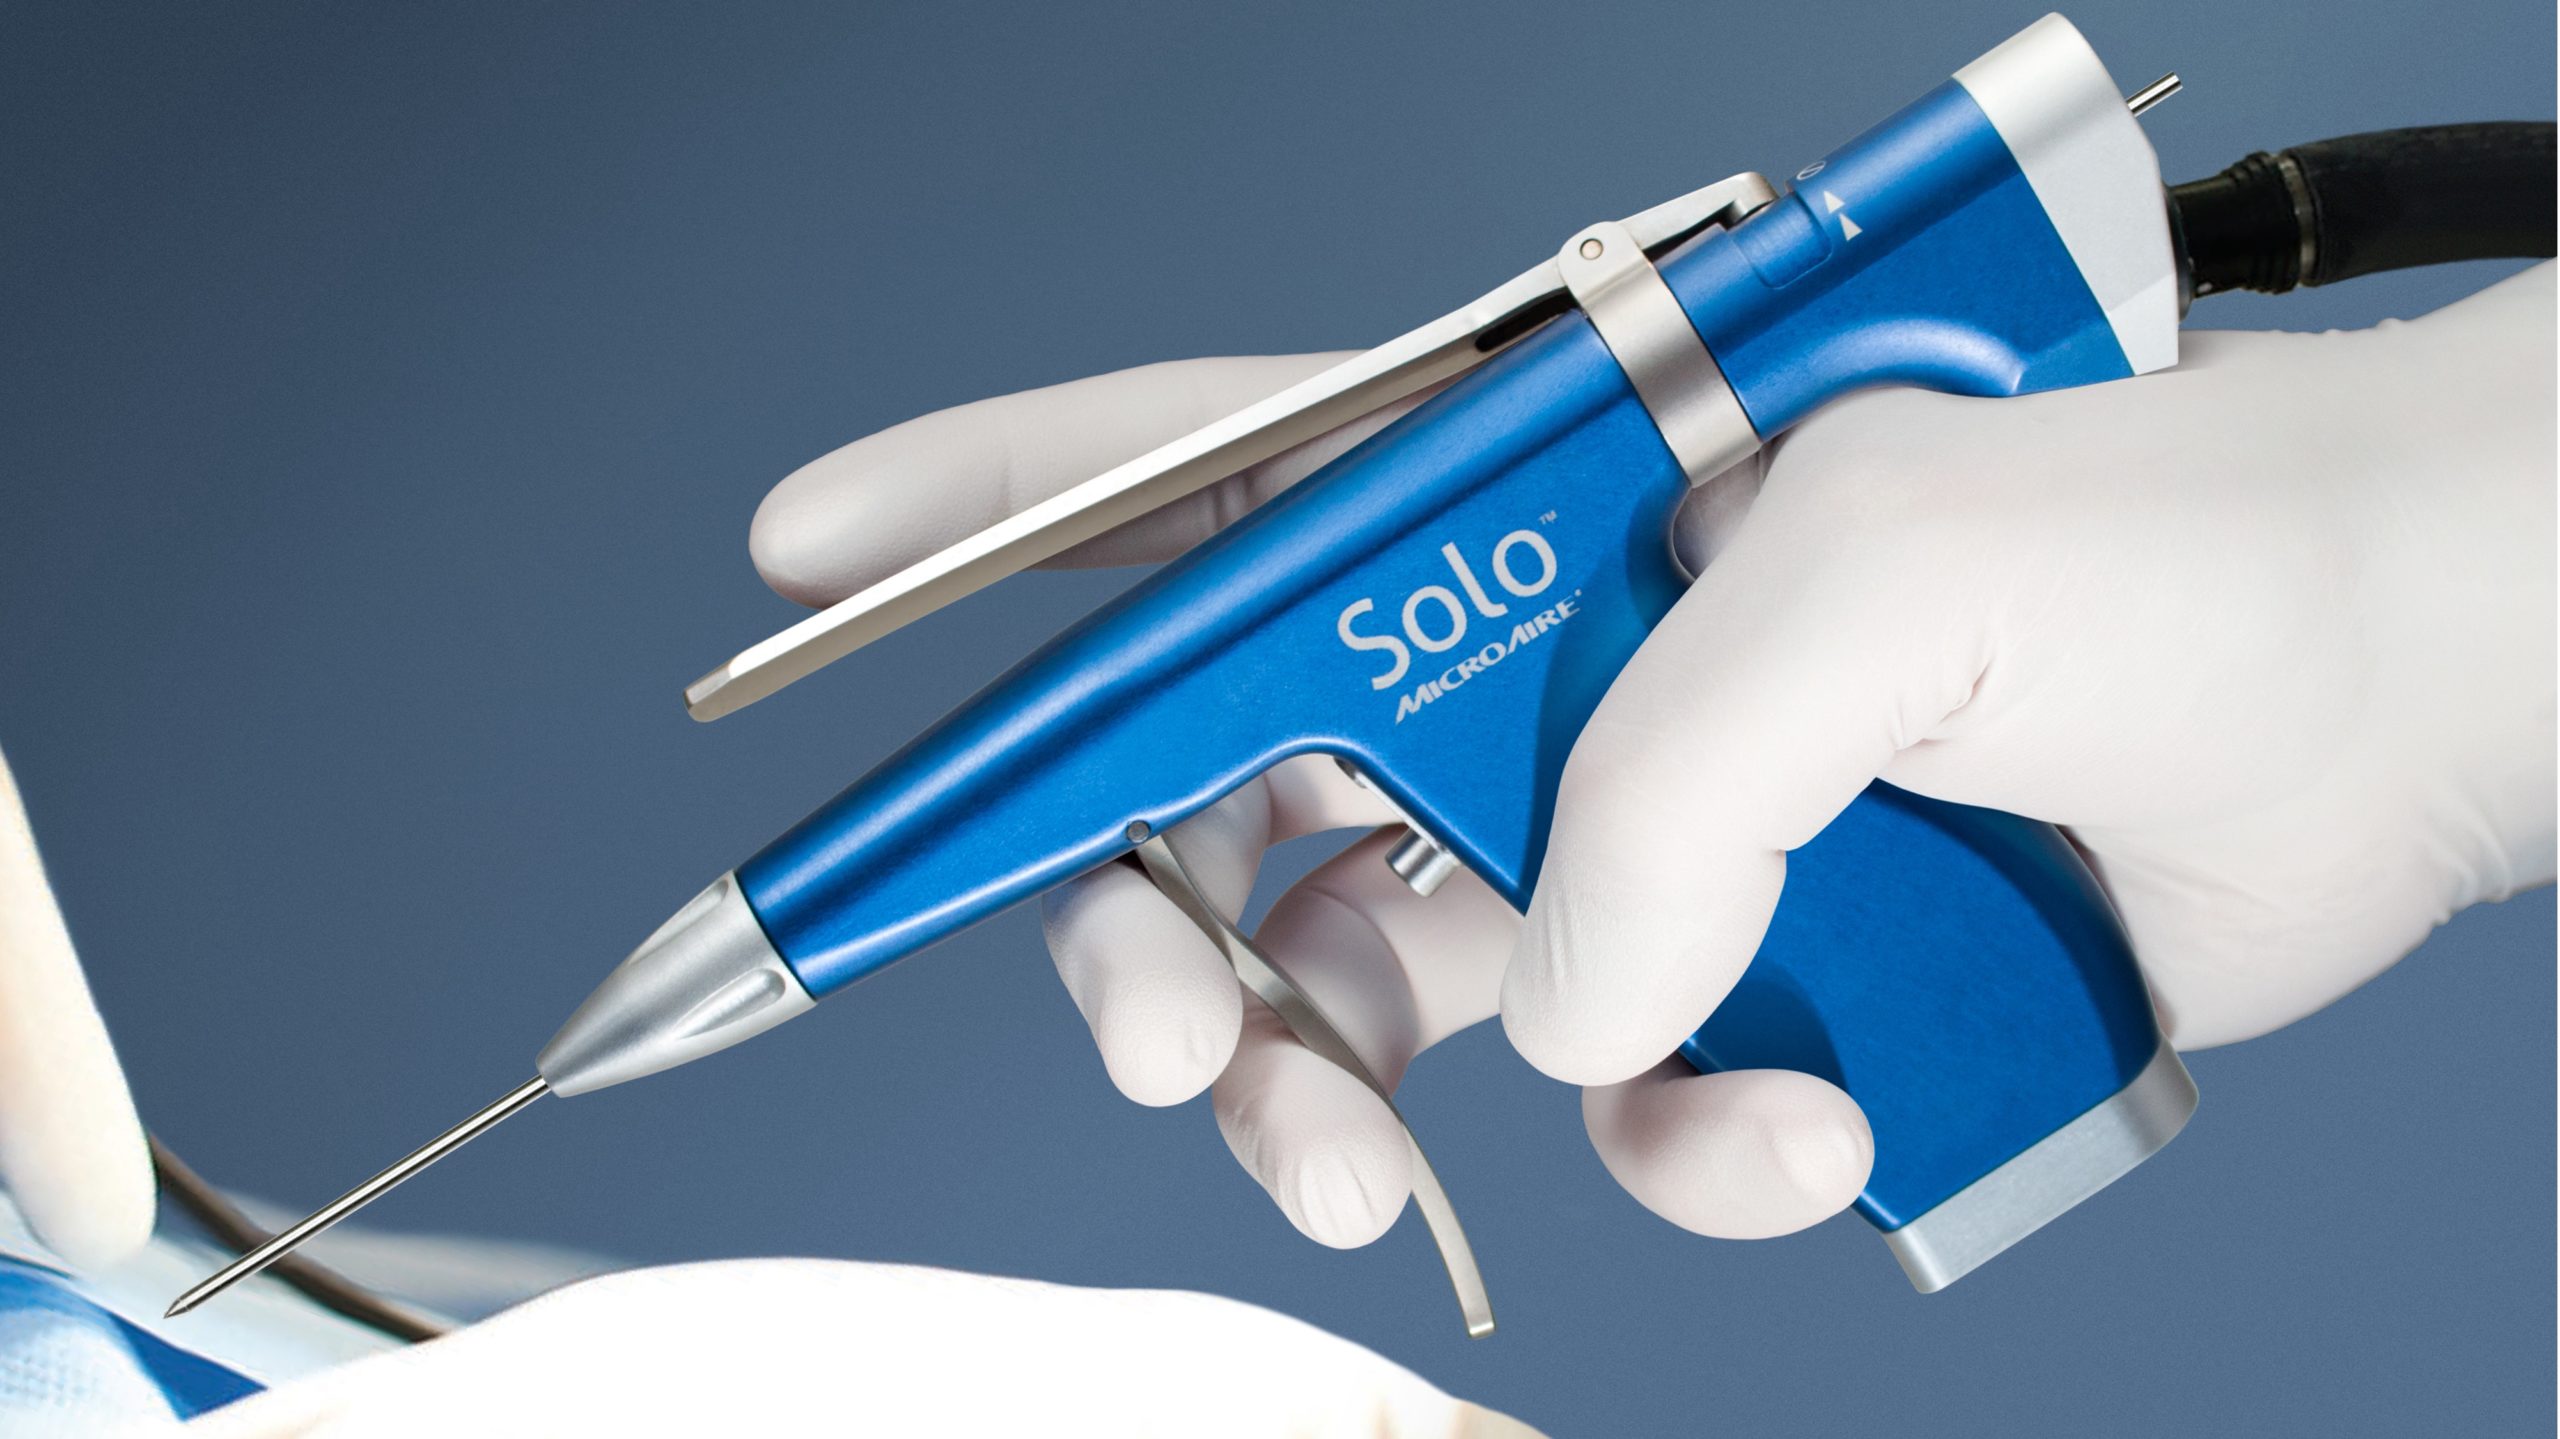 Solo Microaire othopedic surgical tool